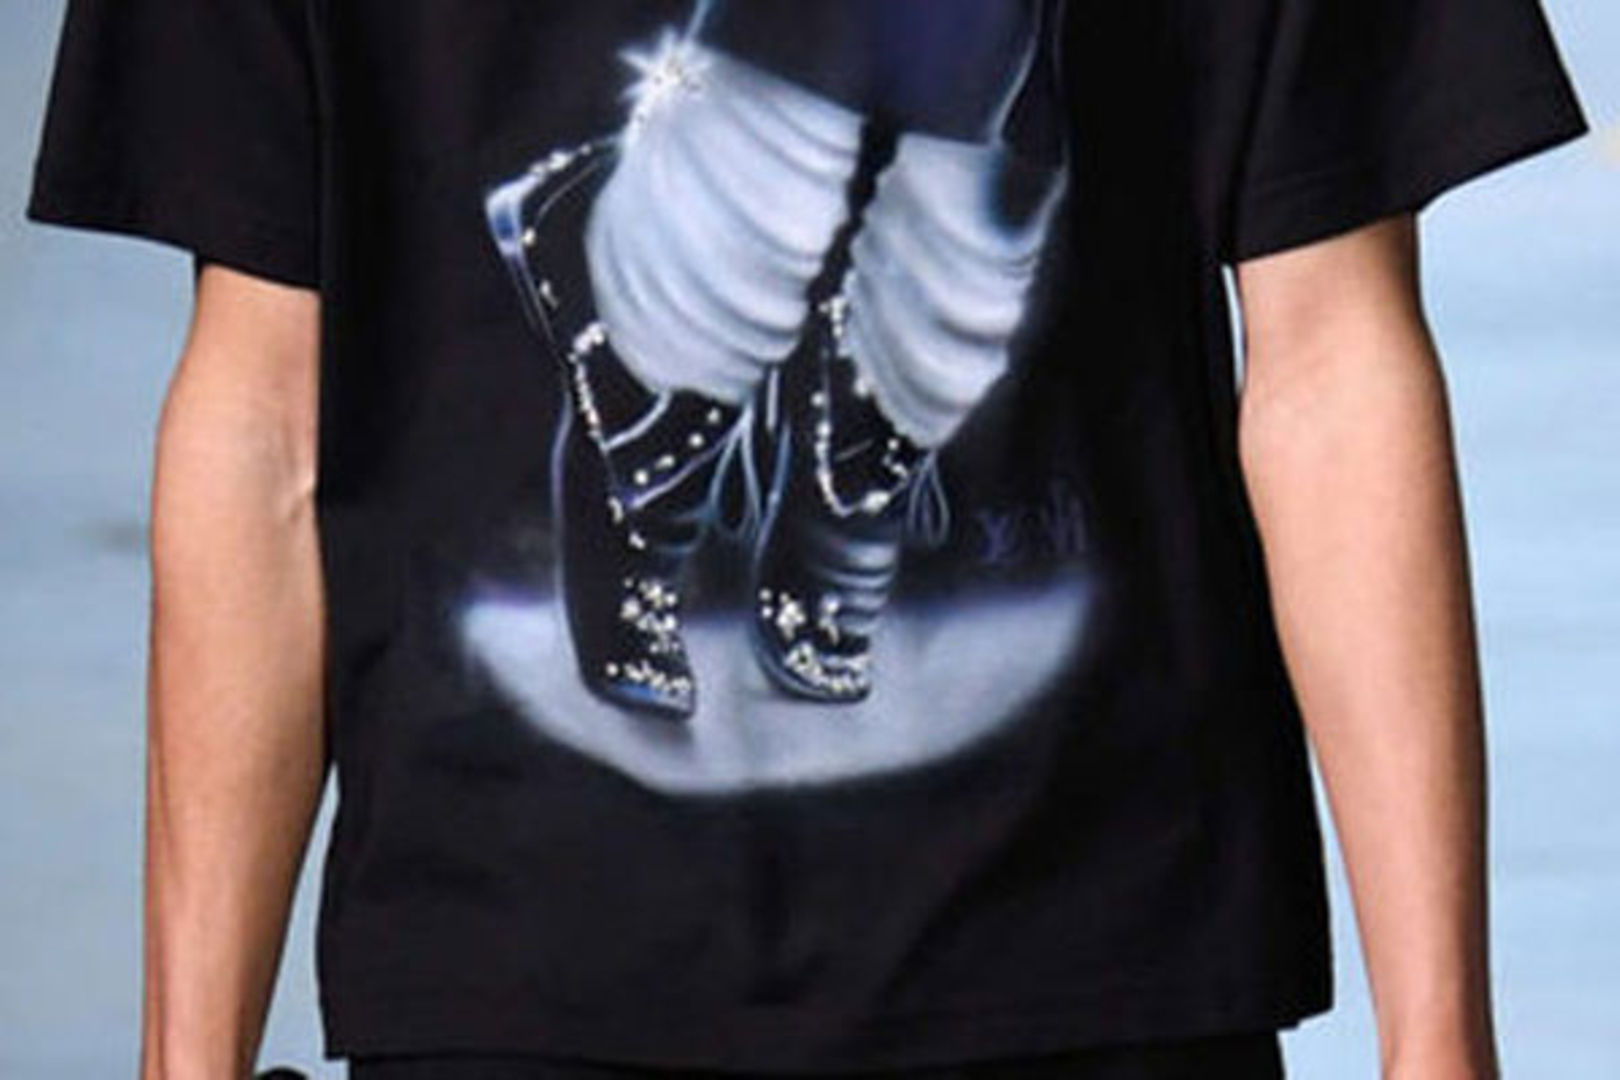 Louis Vuitton Men's Pulls Michael Jackson-Inspired Clothing After